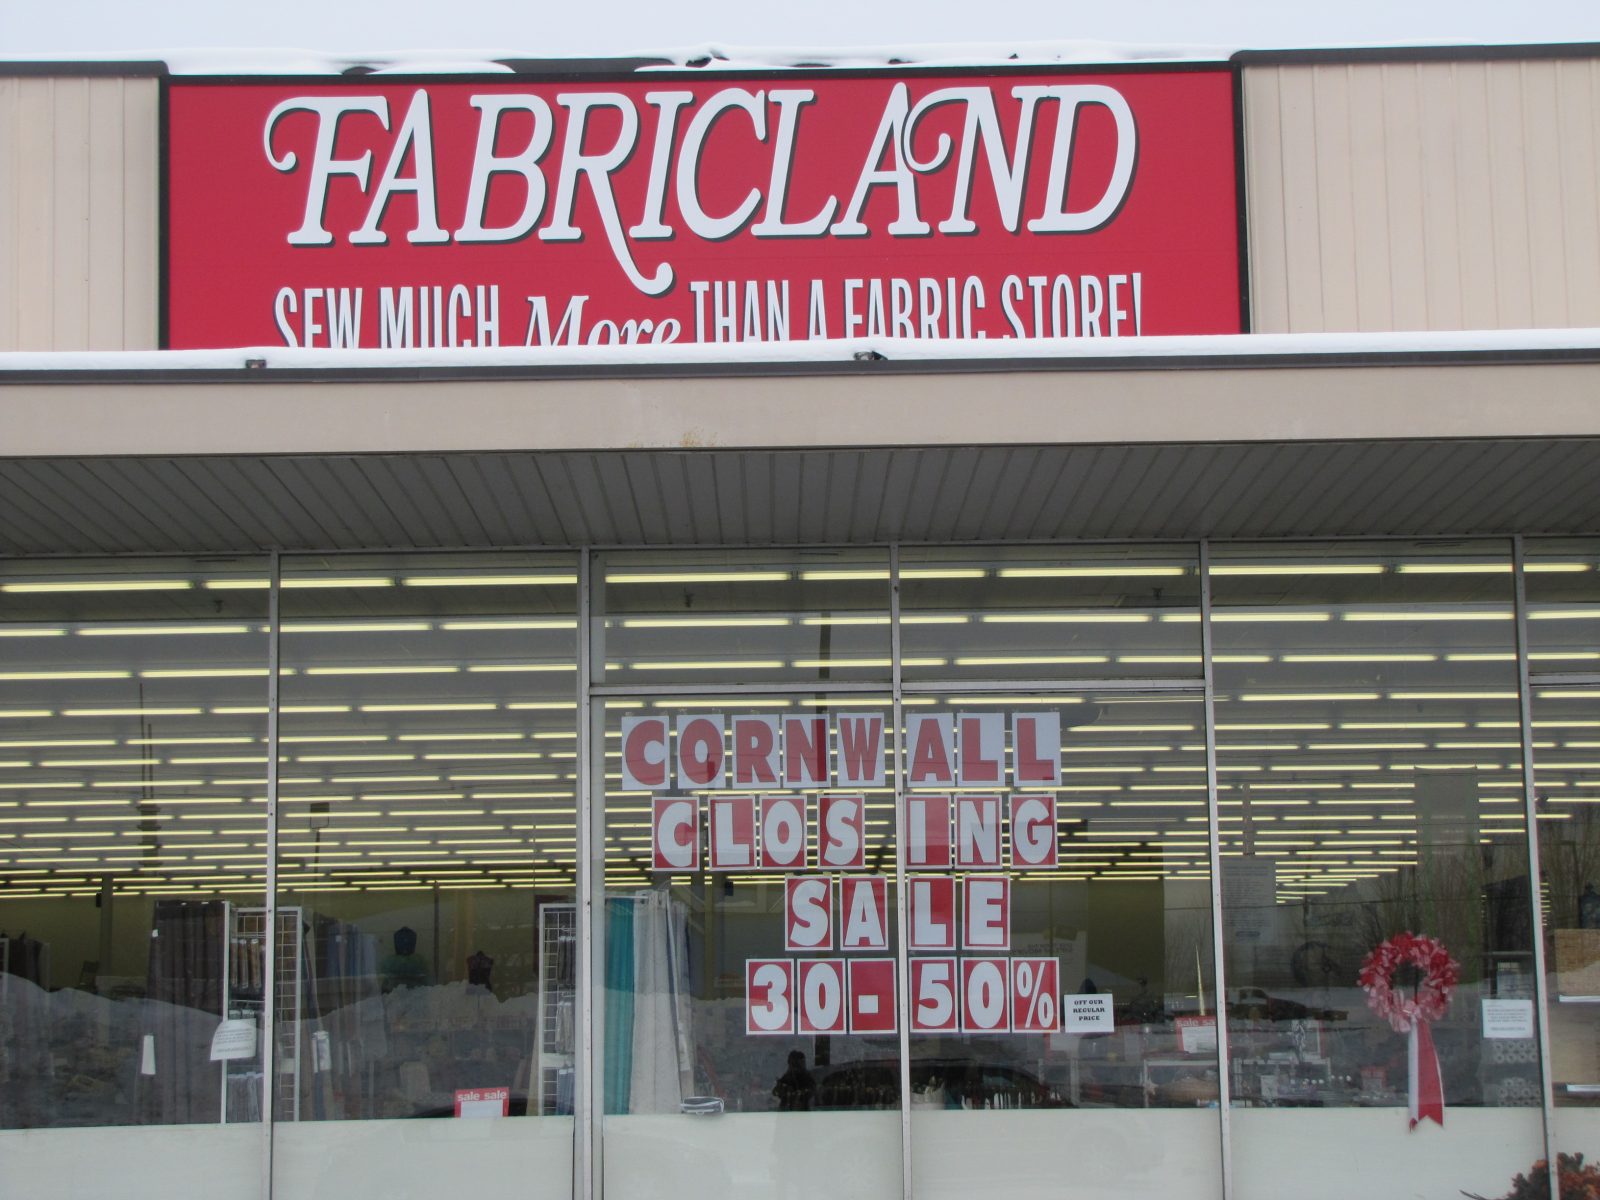 High taxes force out Fabricland